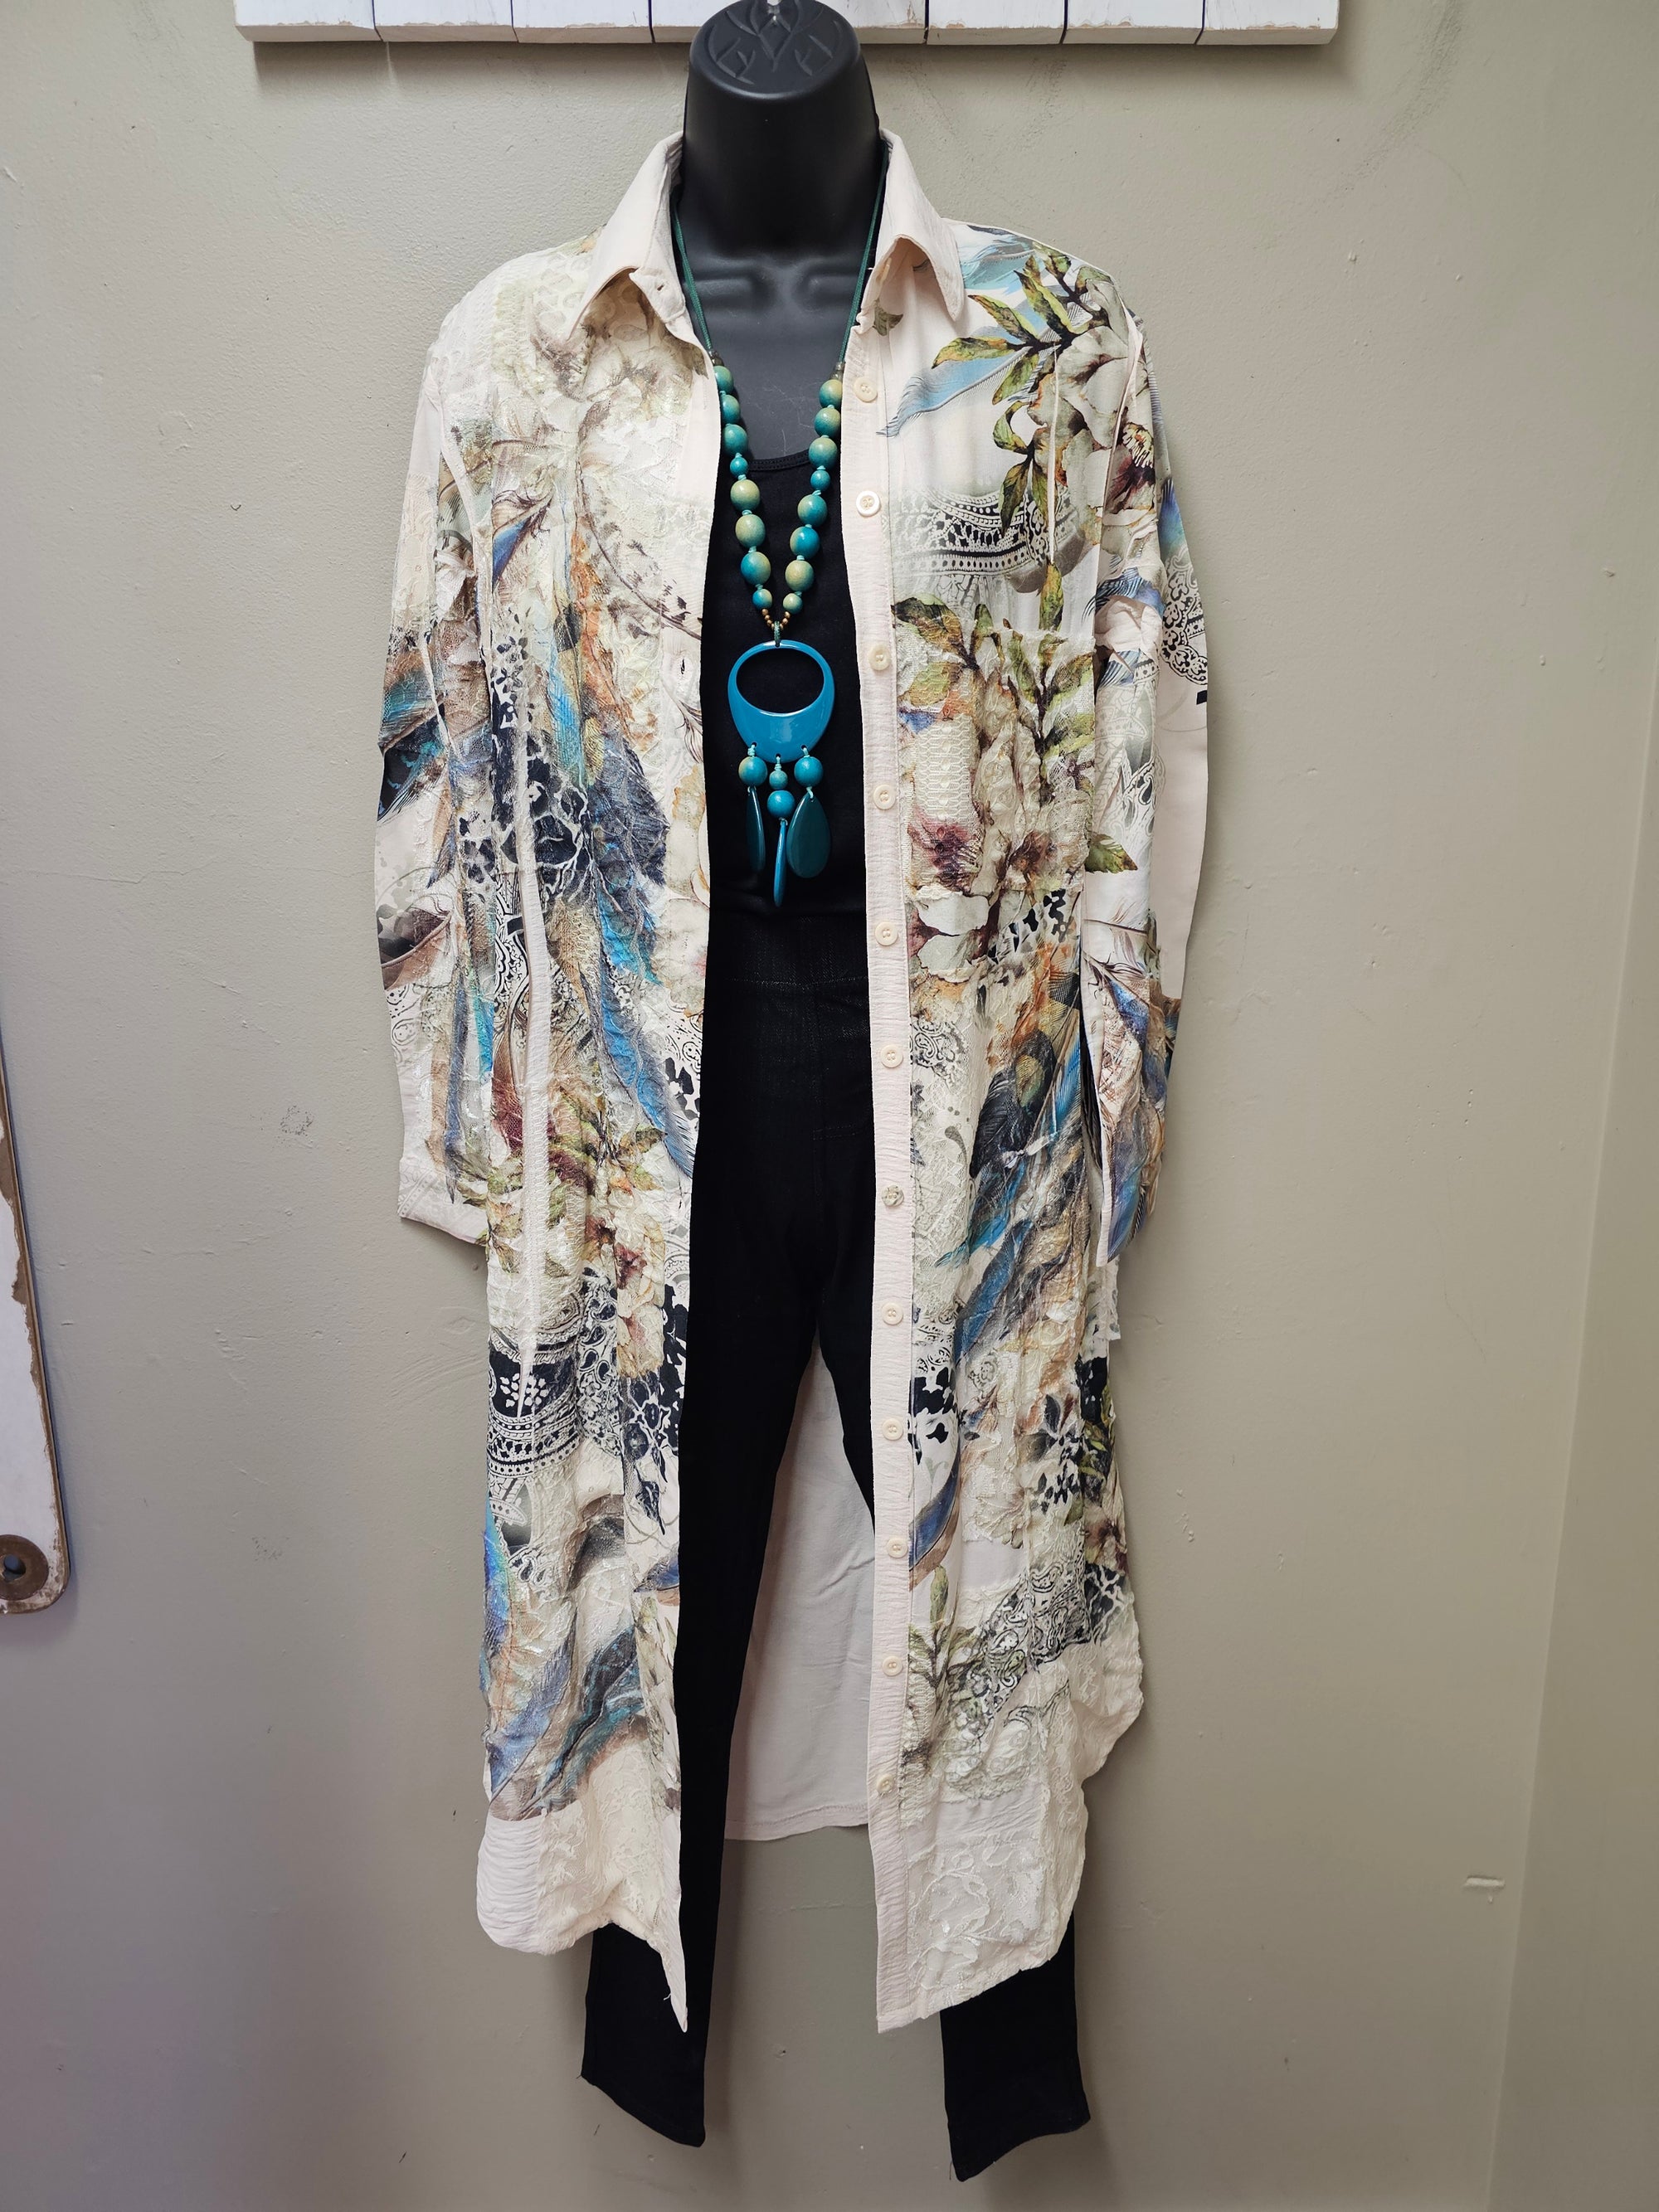 Exquisite Colorful Feathers & Floral Lace Jacket with Pockets